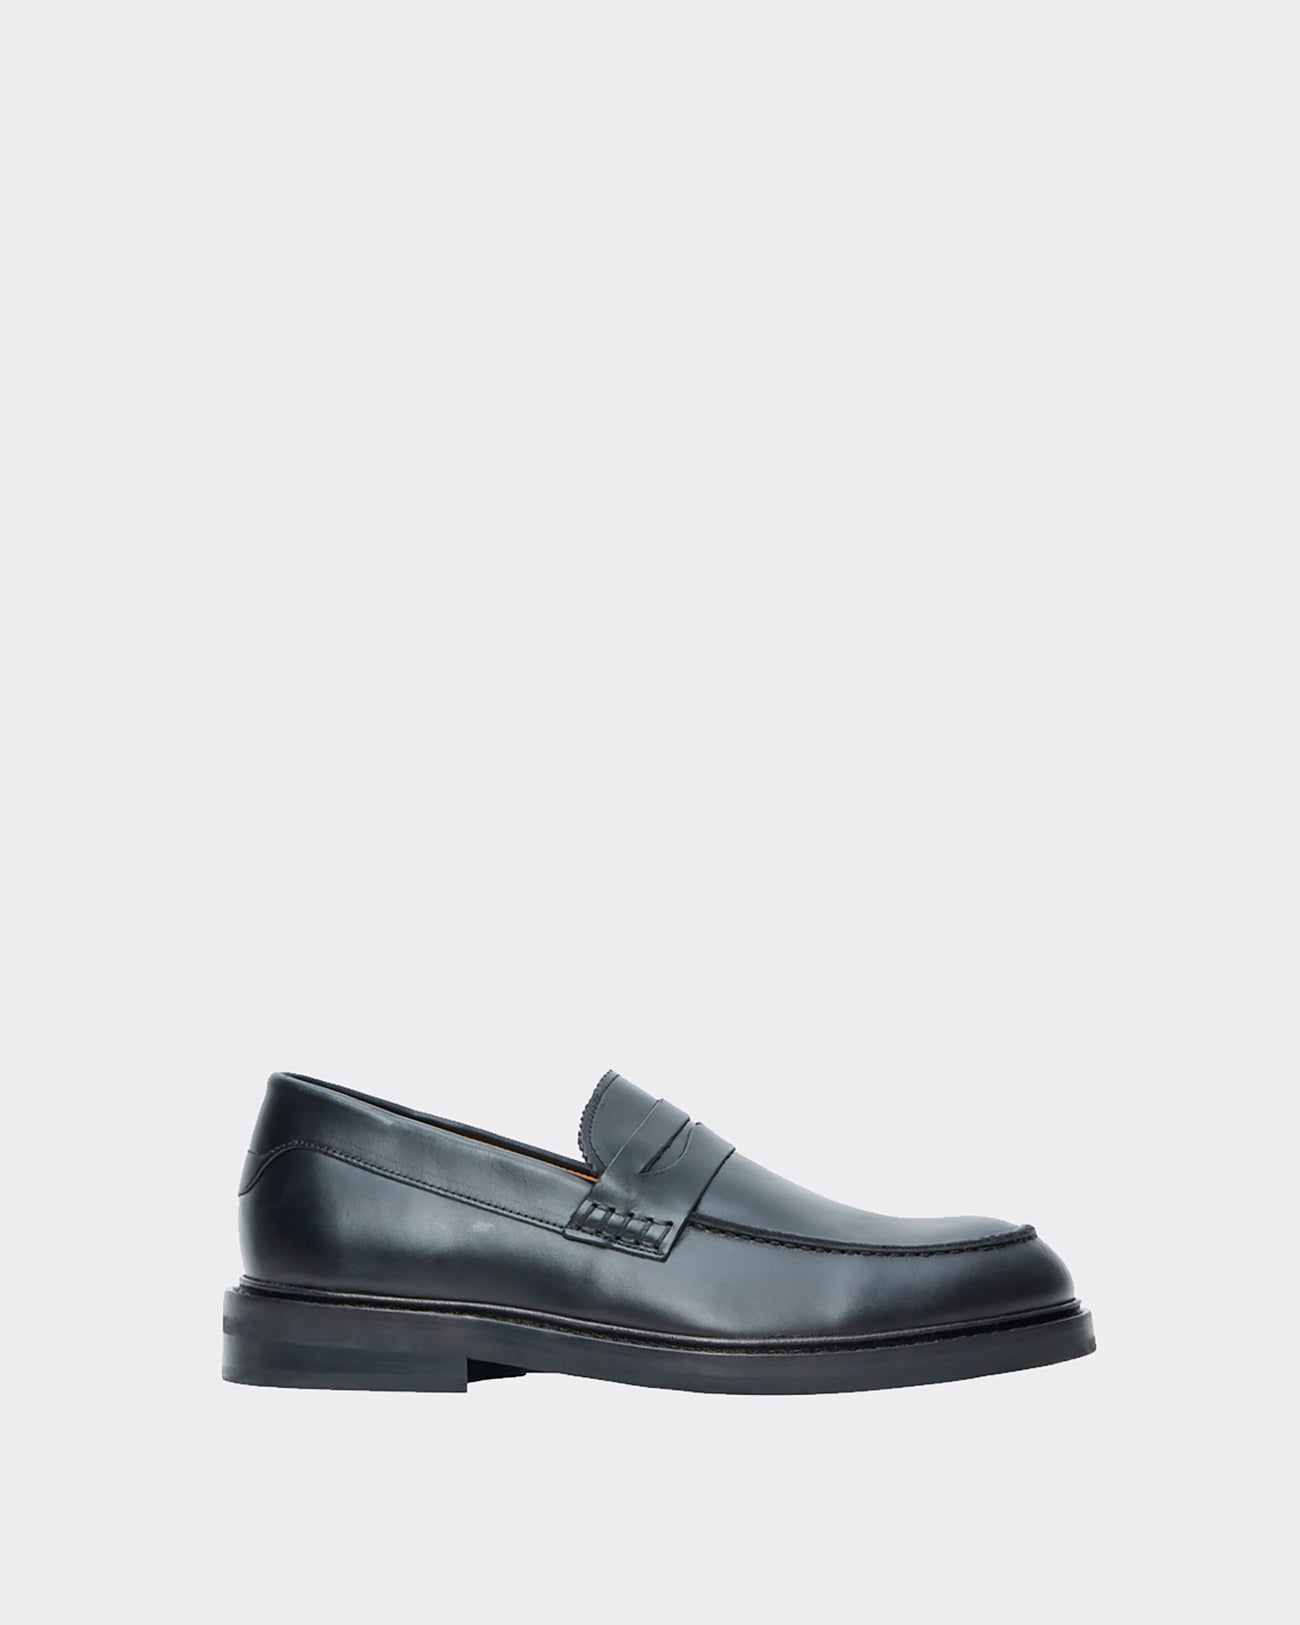 Selected Homme Mocassino Carter Nero in Pelle